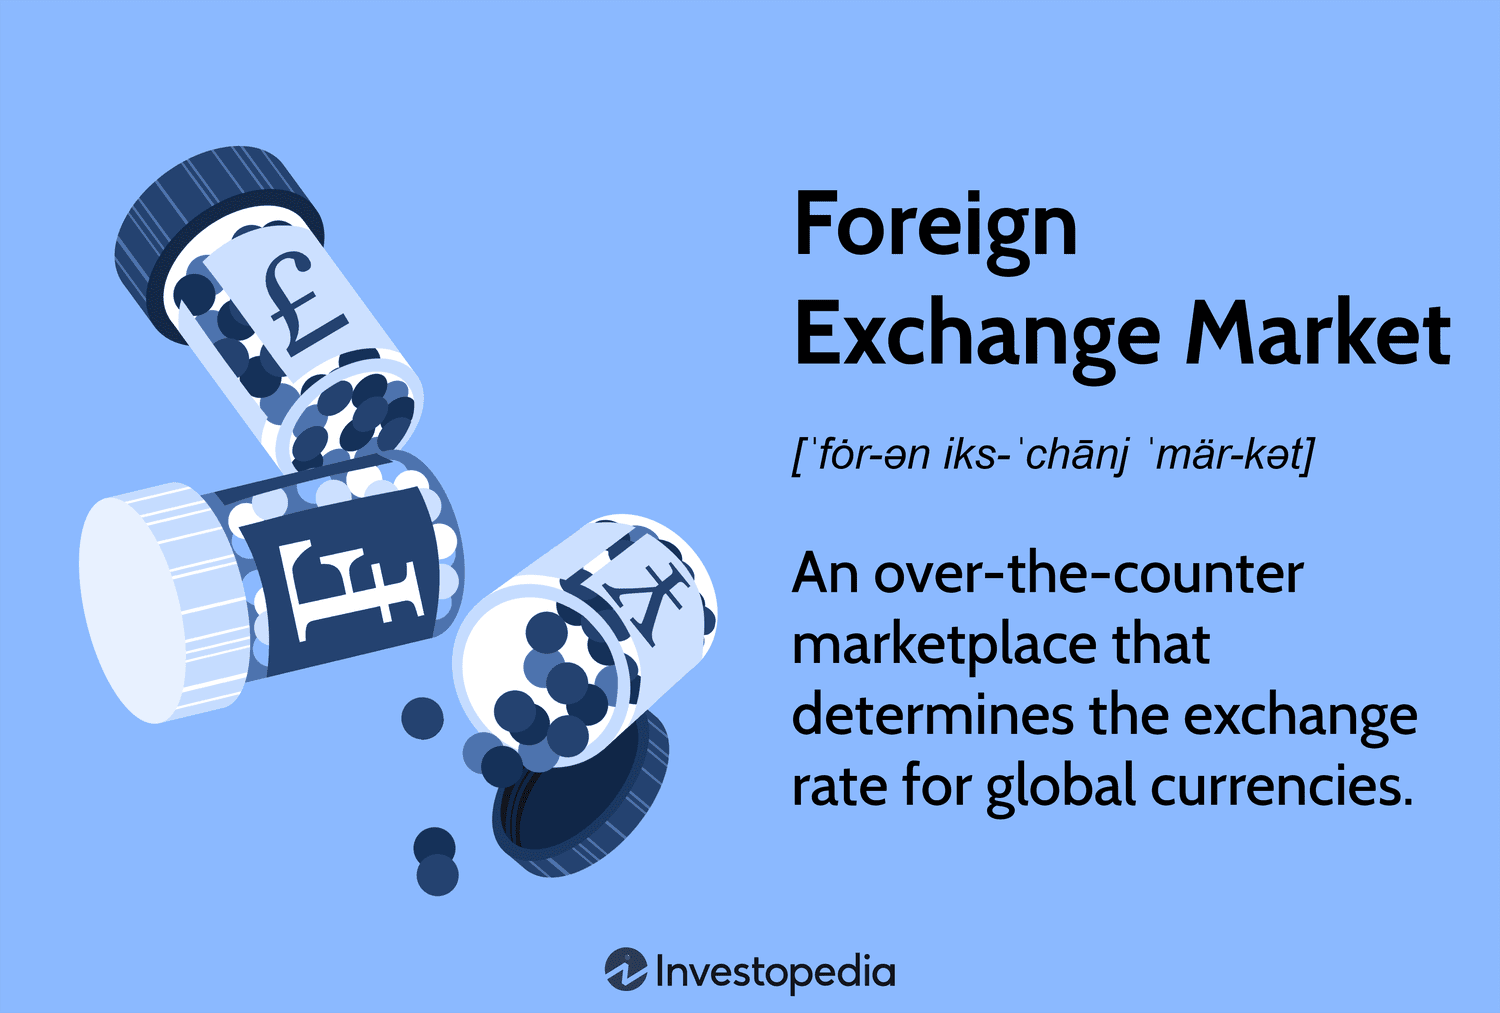 5. Use of Foreign Exchange Swaps by Central Banks in: Instruments of Monetary Management